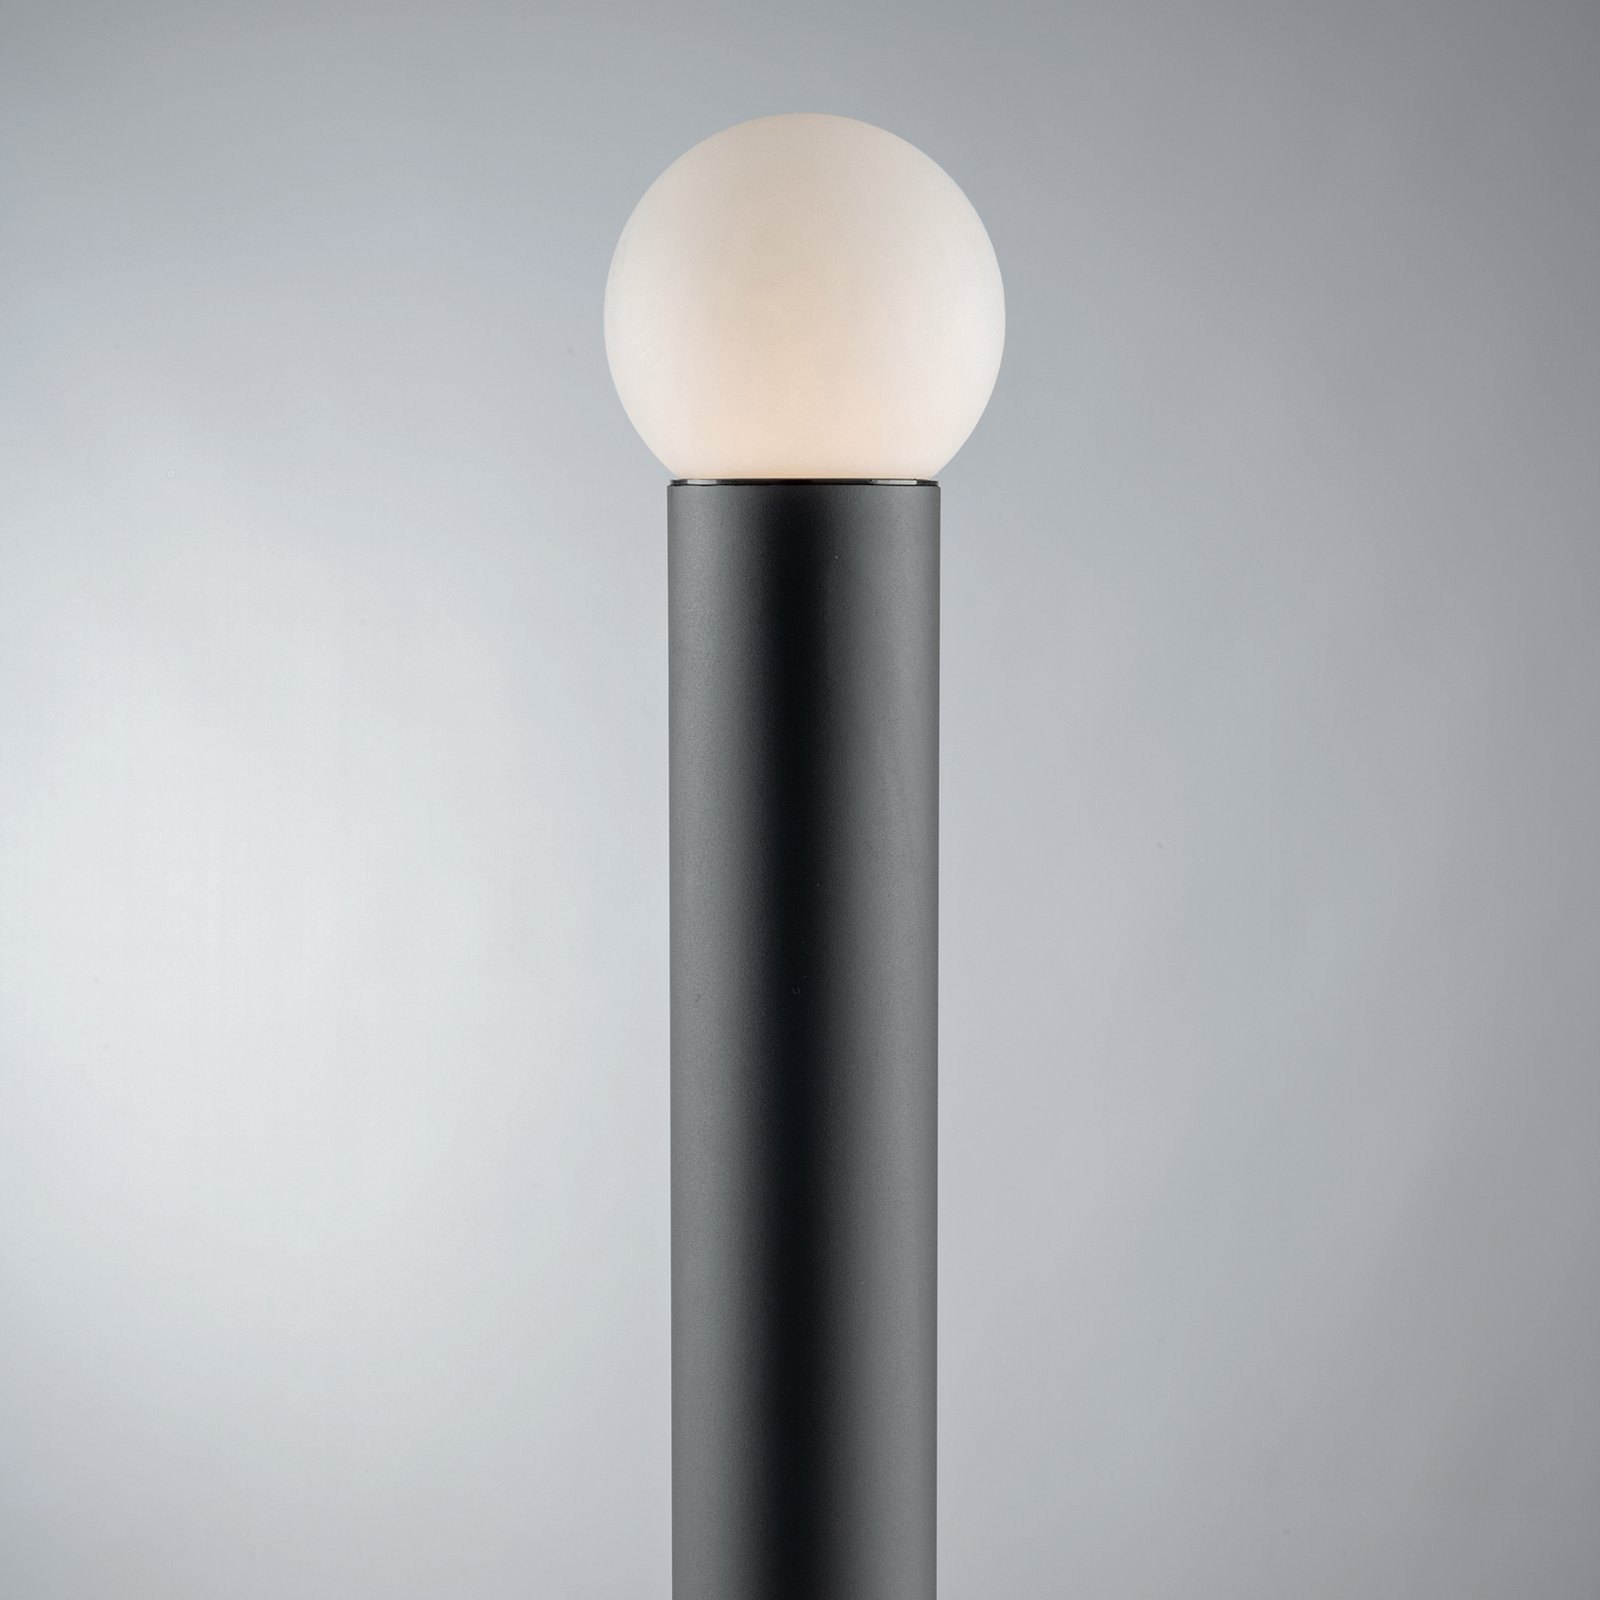 Skittle path light with spherical shade, height 65 cm